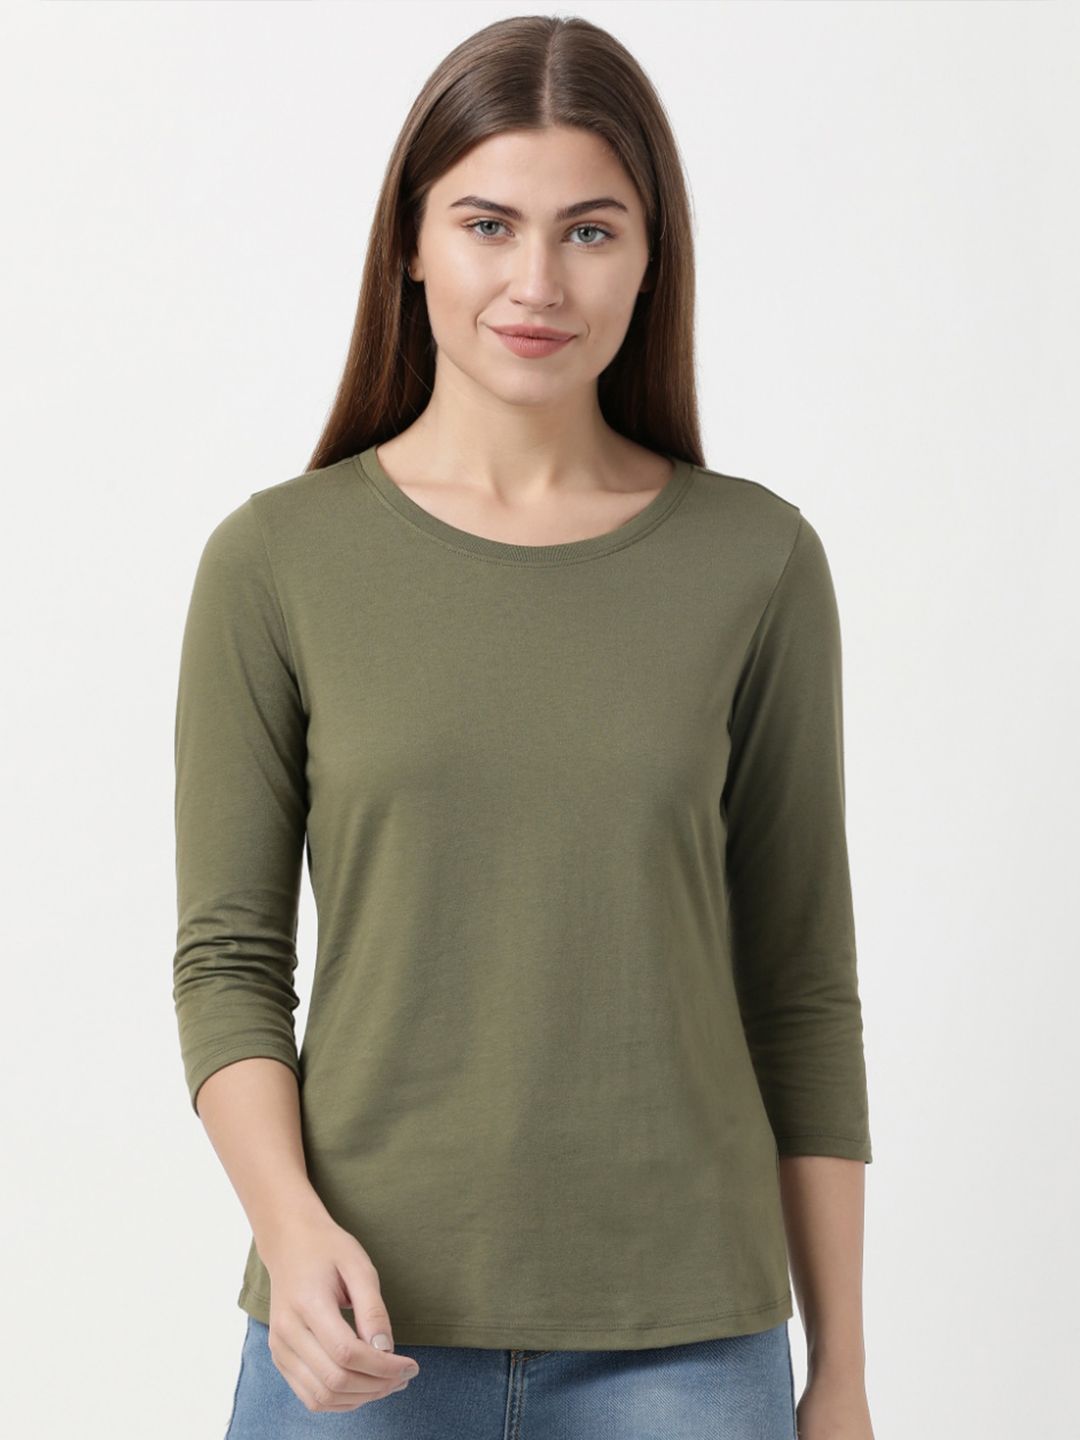 Jockey Women Olive Green Solid Lounge T-shirt Price in India